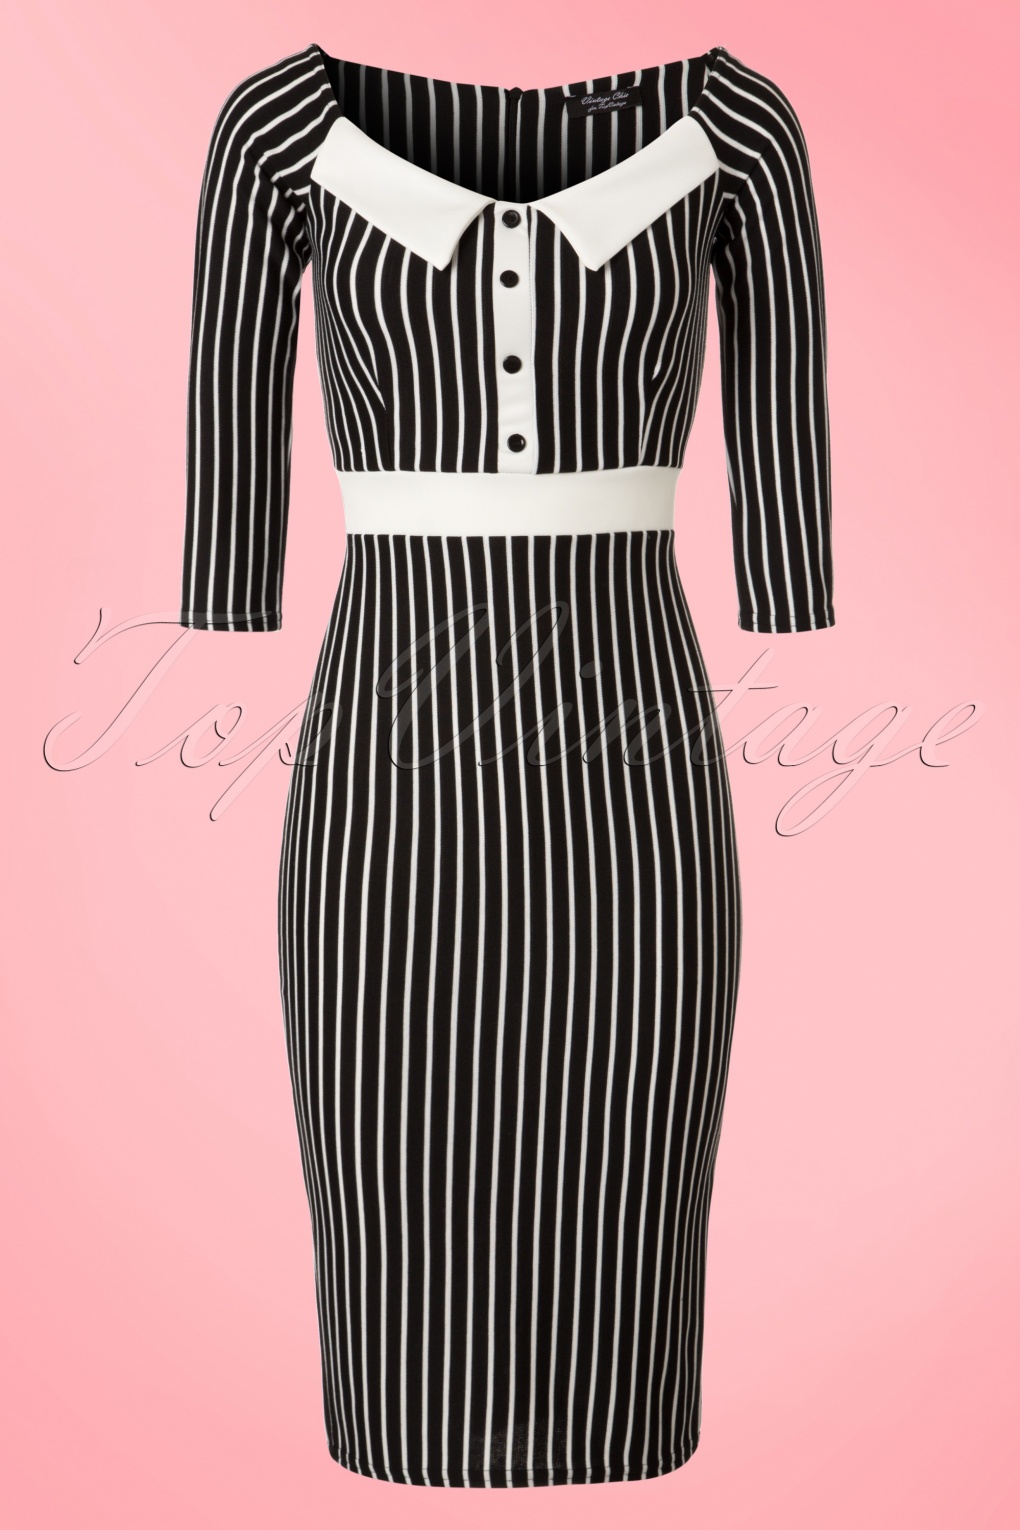 black and white pencil dress